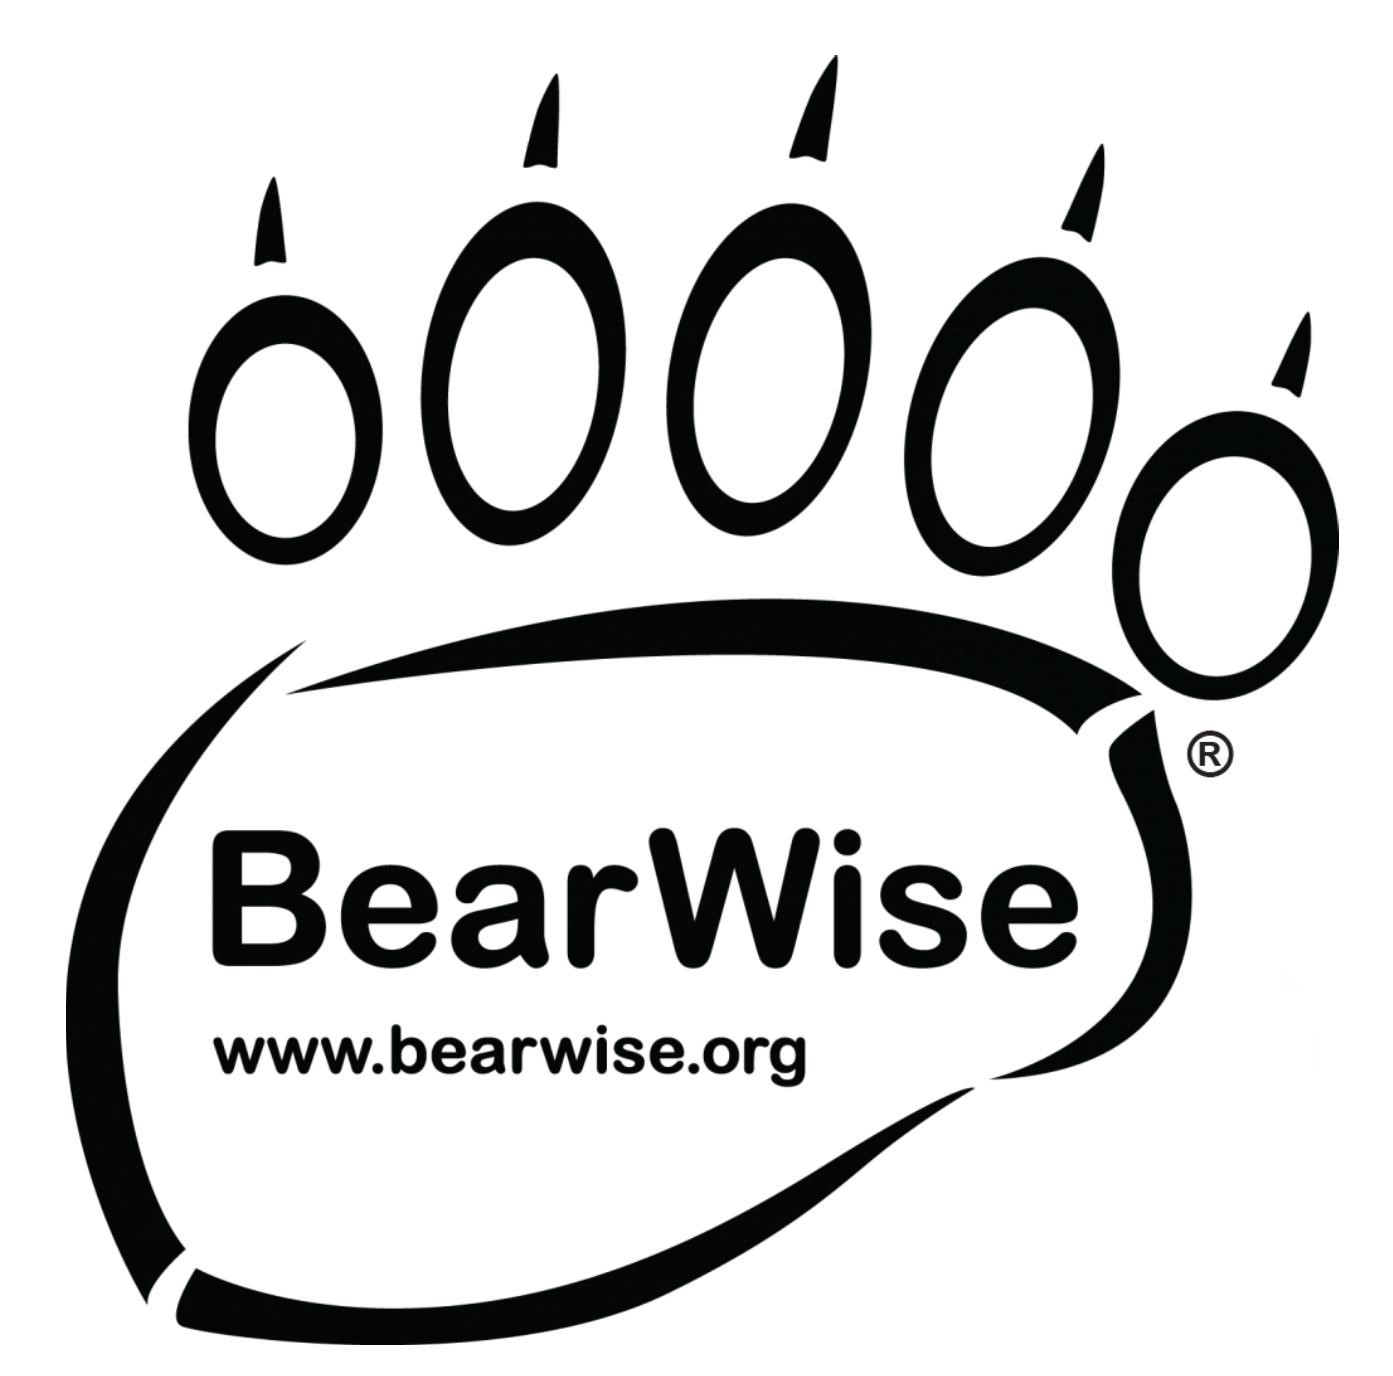 BearWise program at Currituck County Public Library on March 23